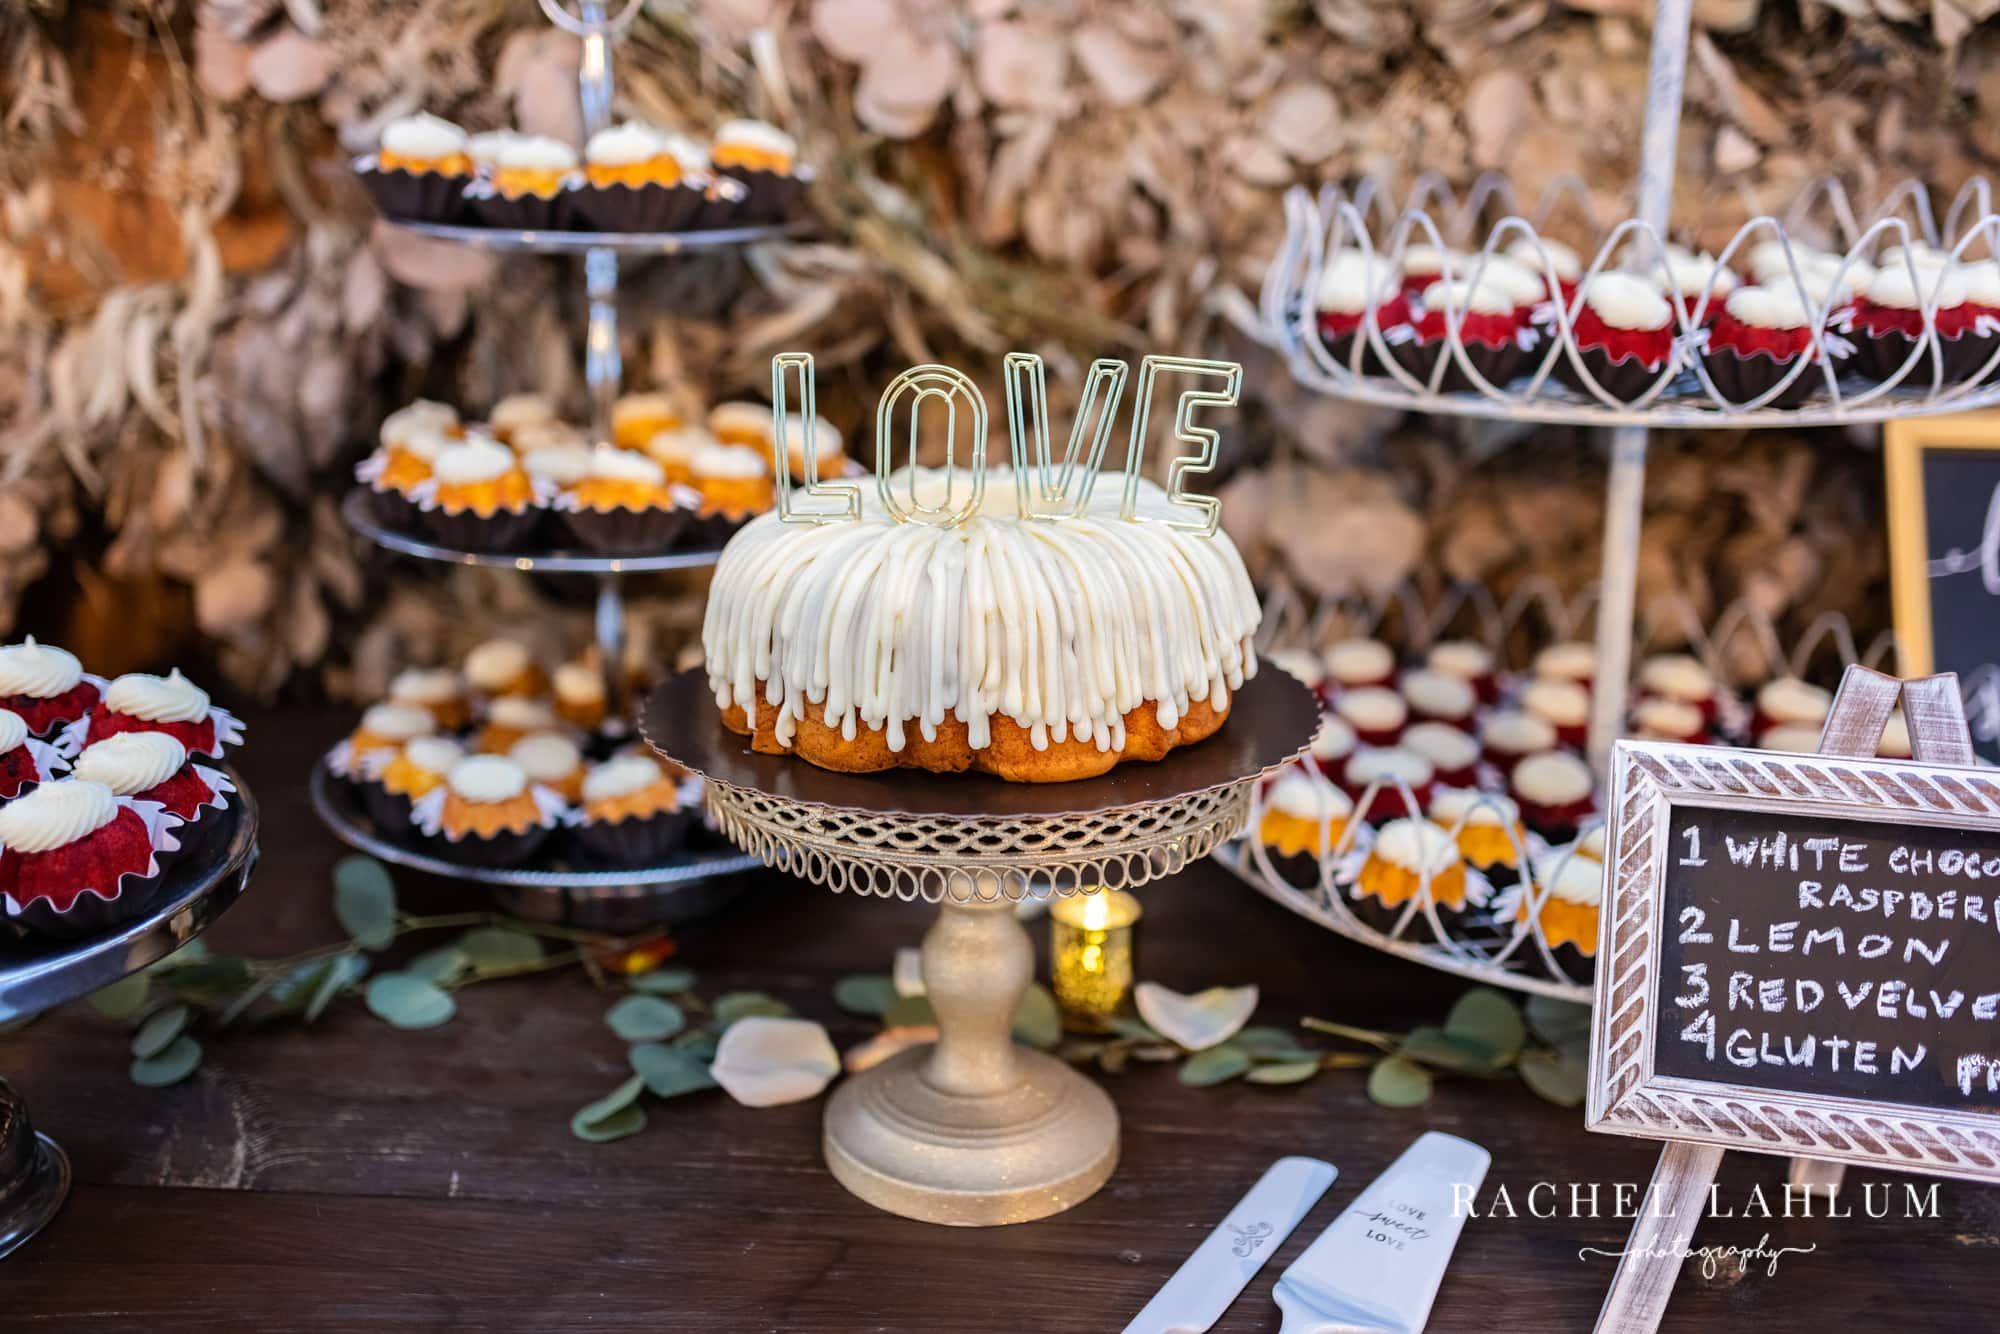 A cake with letters spelling “love” on top sits in the center of the dessert table.